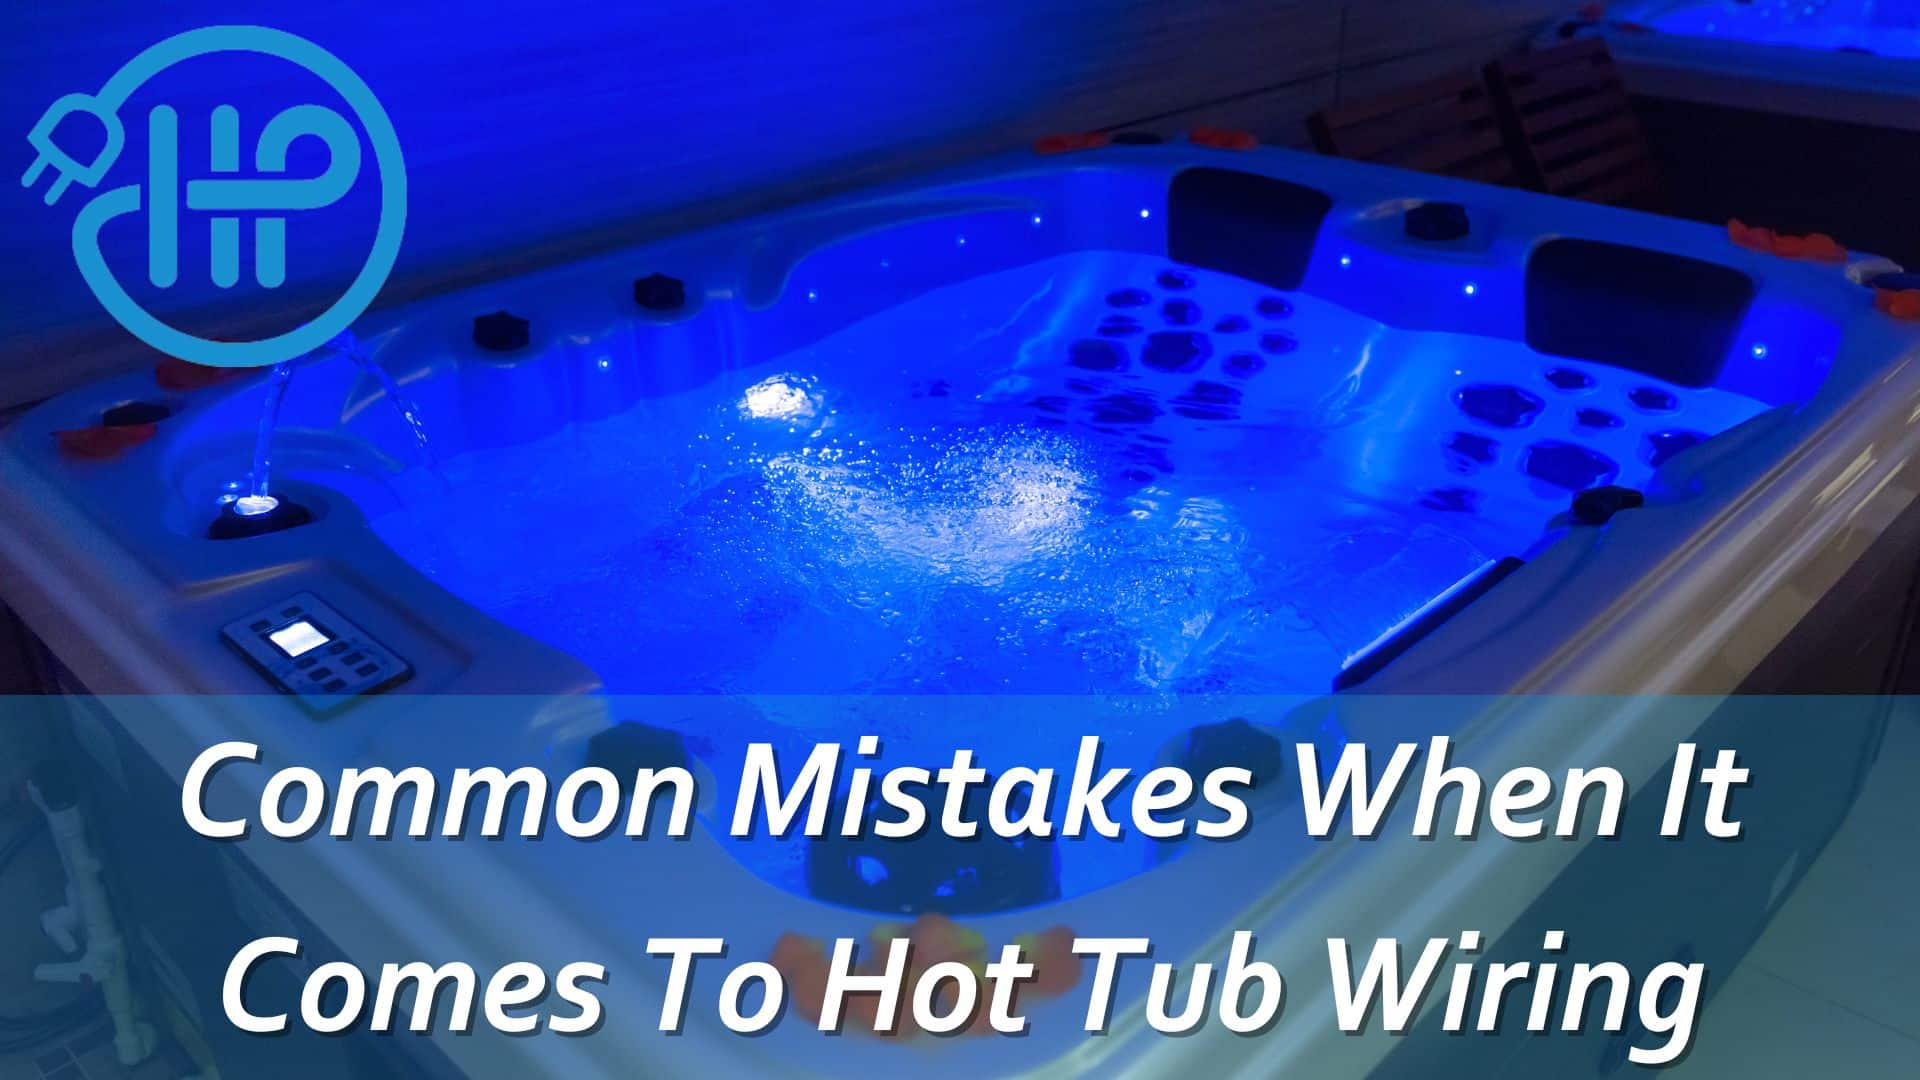 Common Mistakes to Hot Tub Wiring in Edmonton